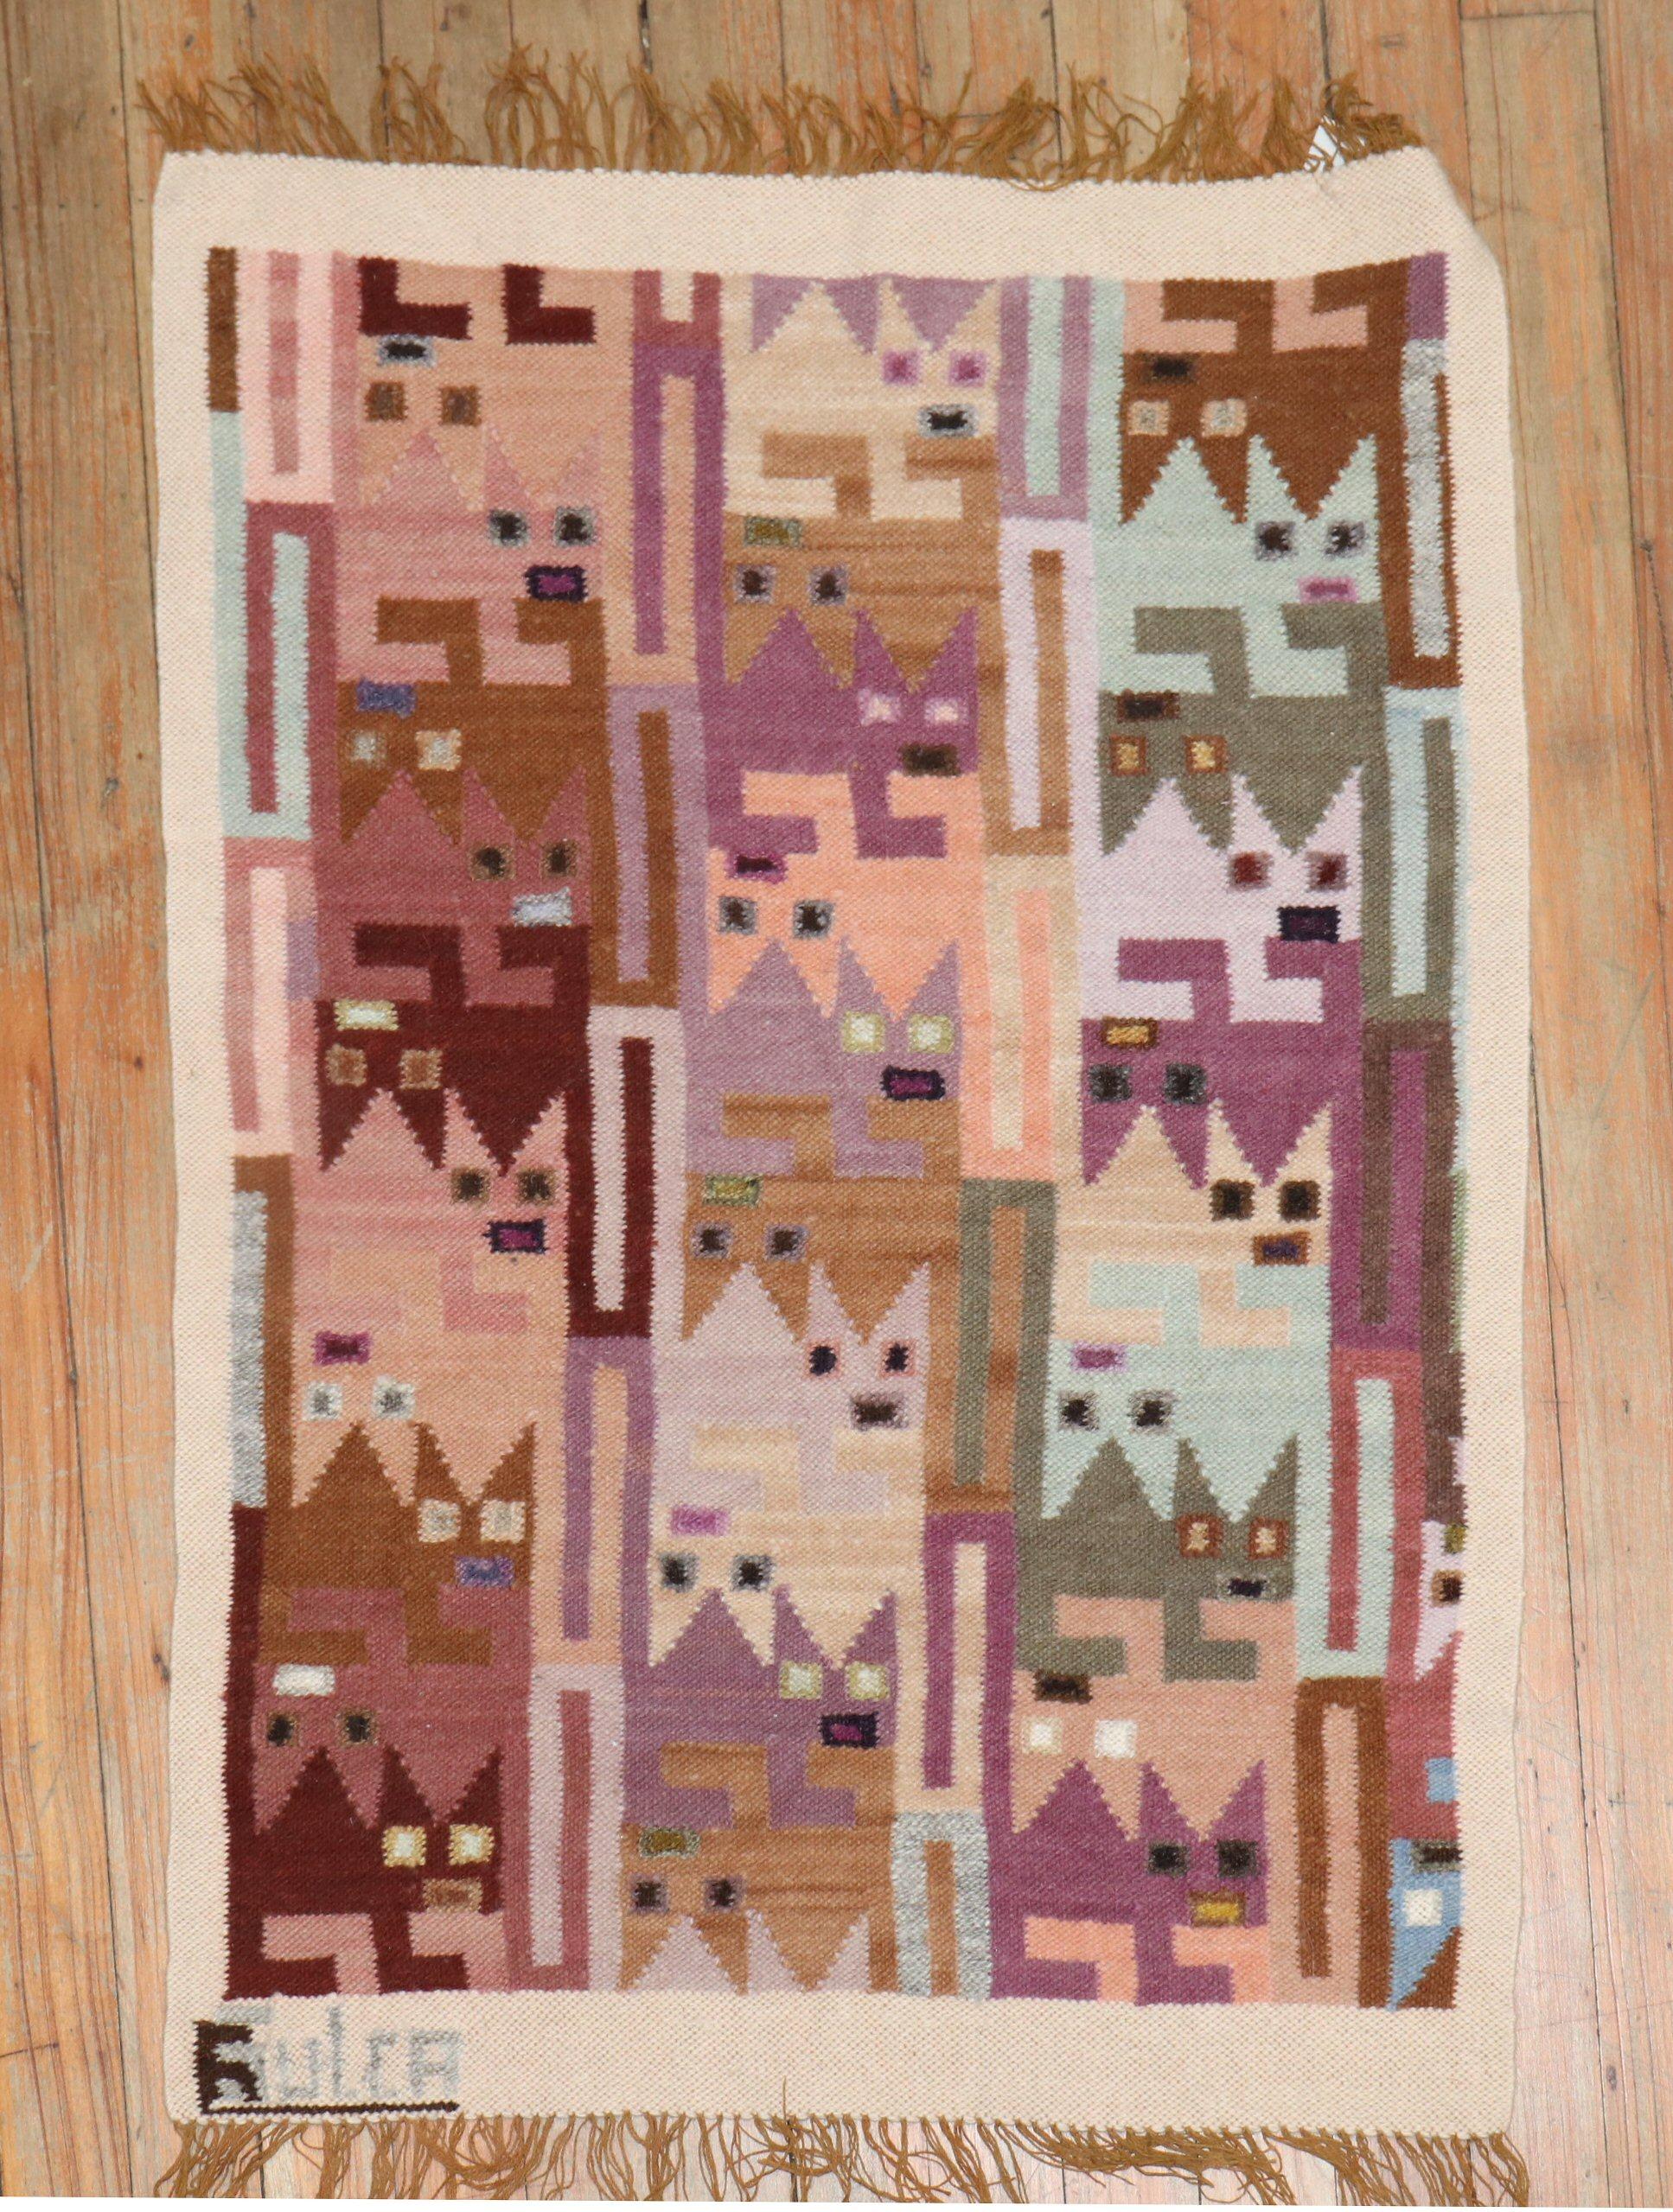 Mini size signed swedish kilim with a design consisting of a flurry of kittens

Measures: 1'11